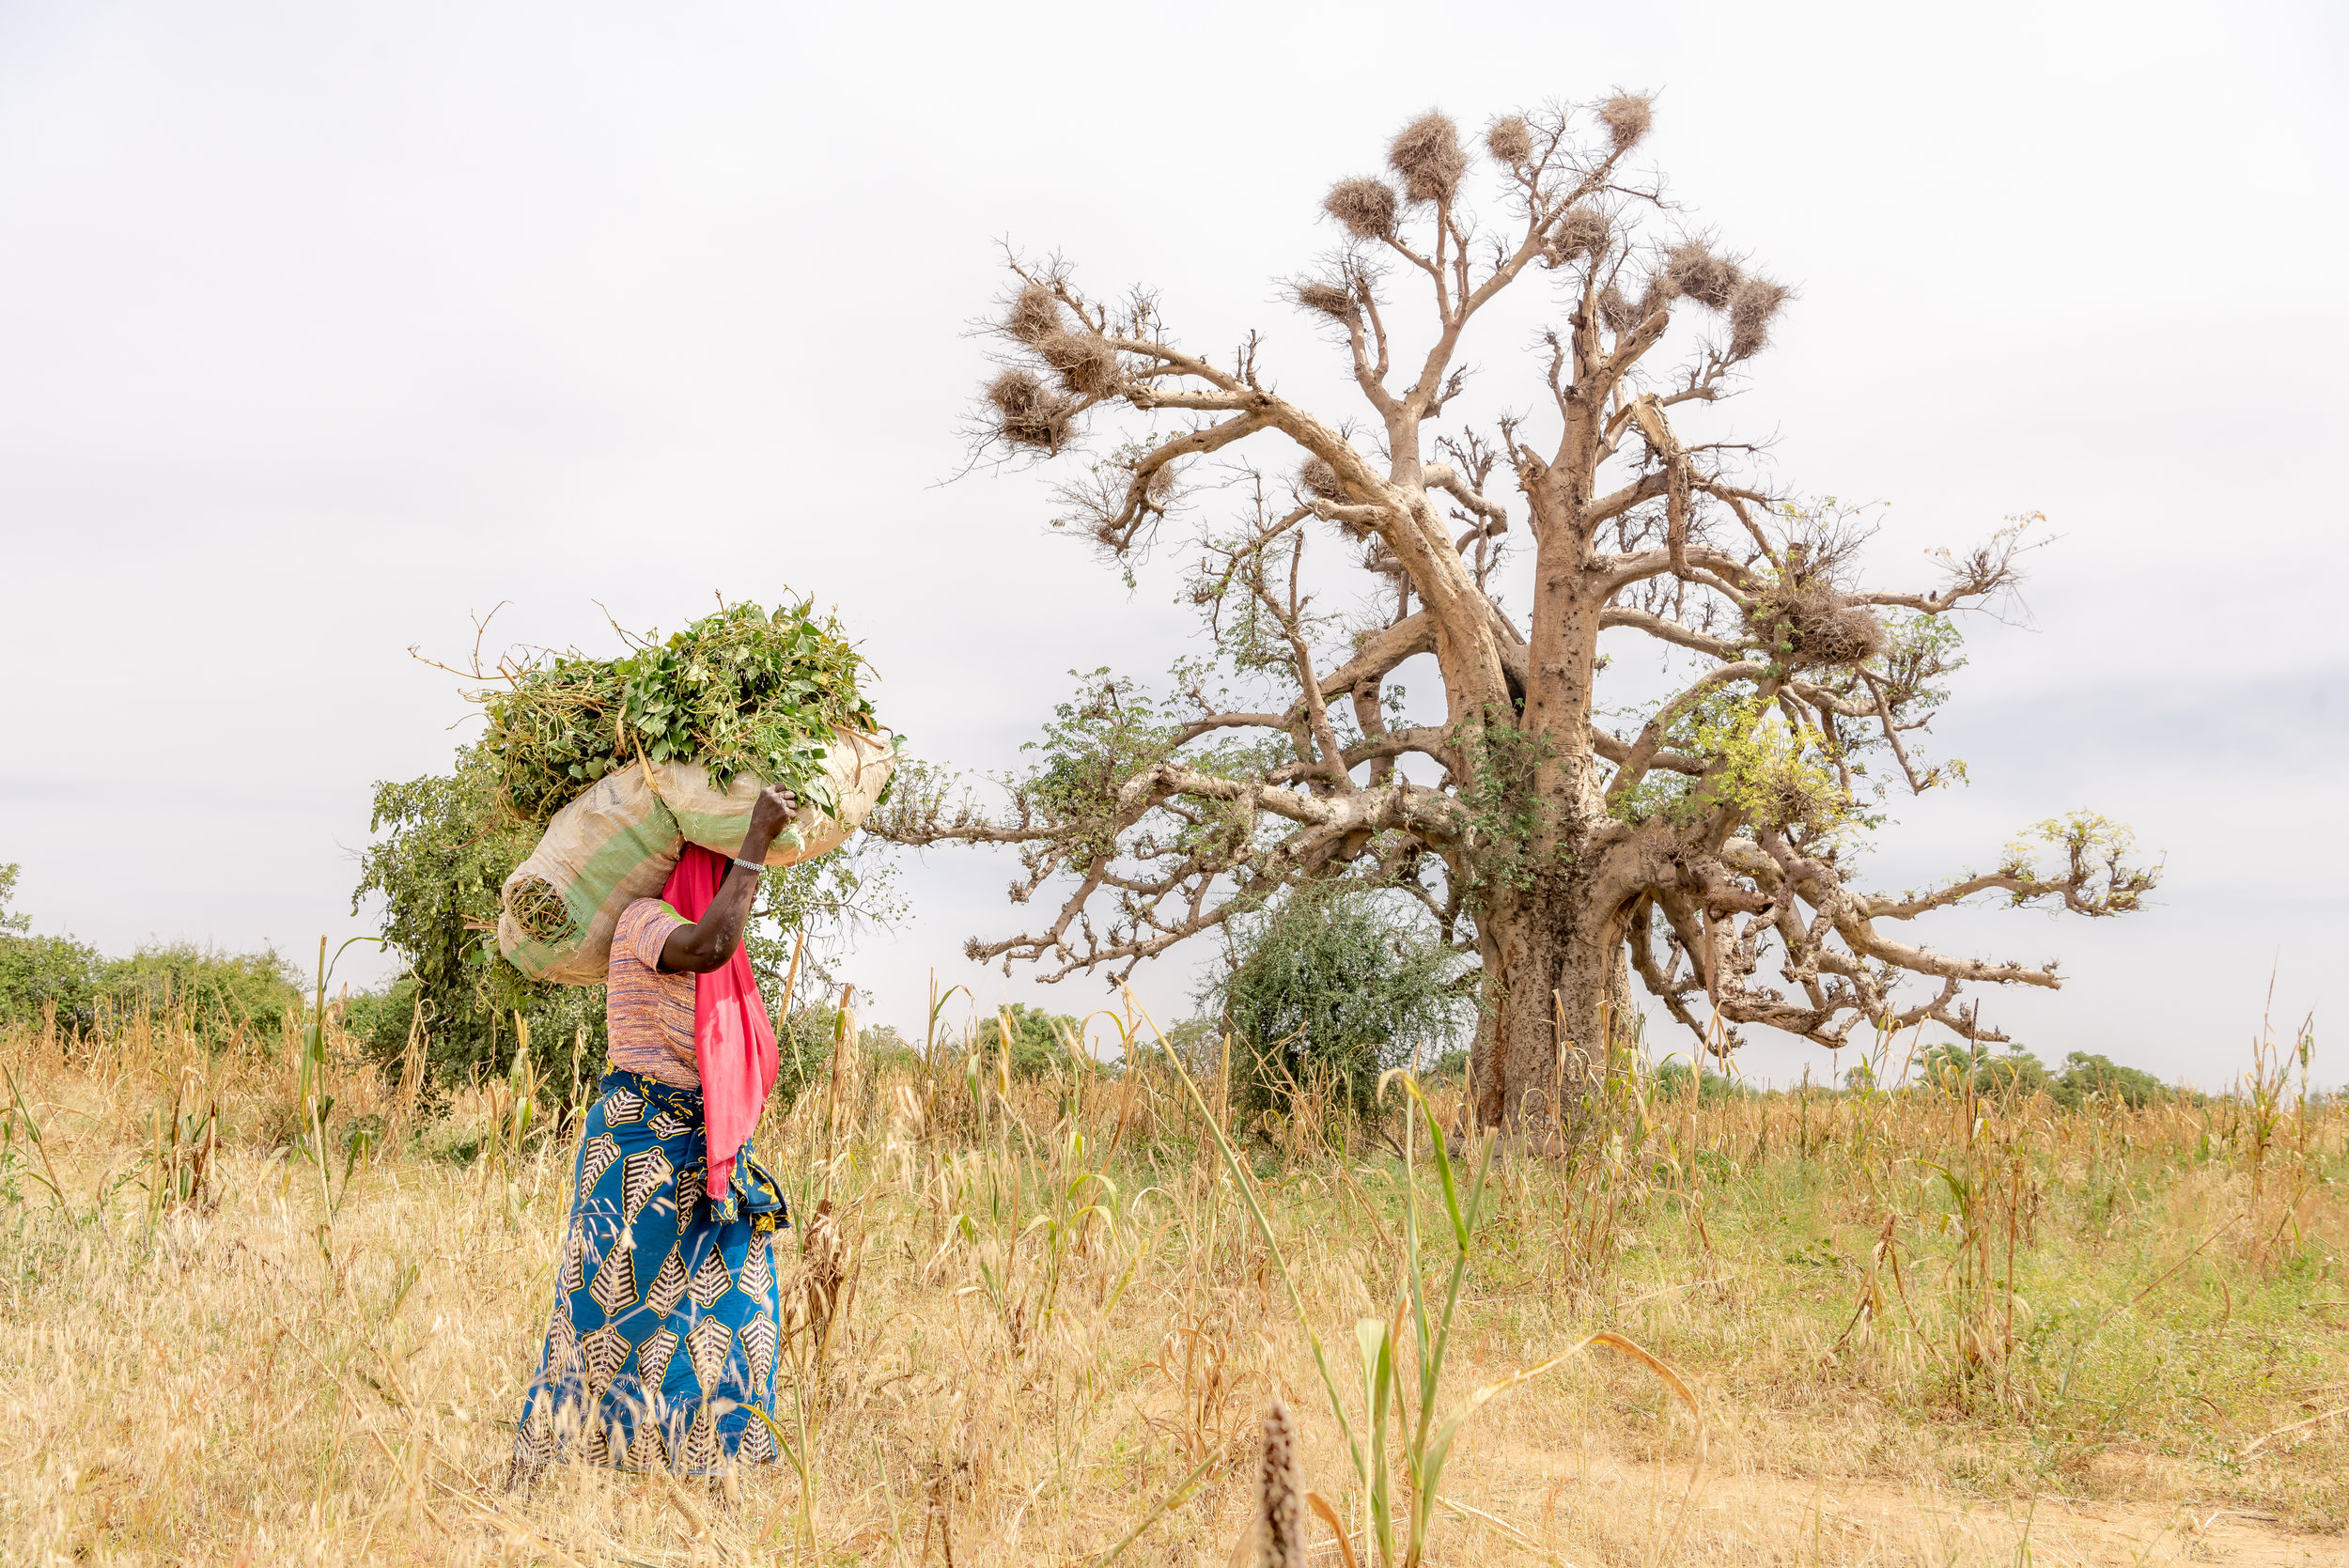 PICTURED: Village woman of Niger walking near beautiful ancient lone tree, transporting leaves to her farm. The female populations of sub-Saharan Africa are the most at risk of any on earth for excess BMI.